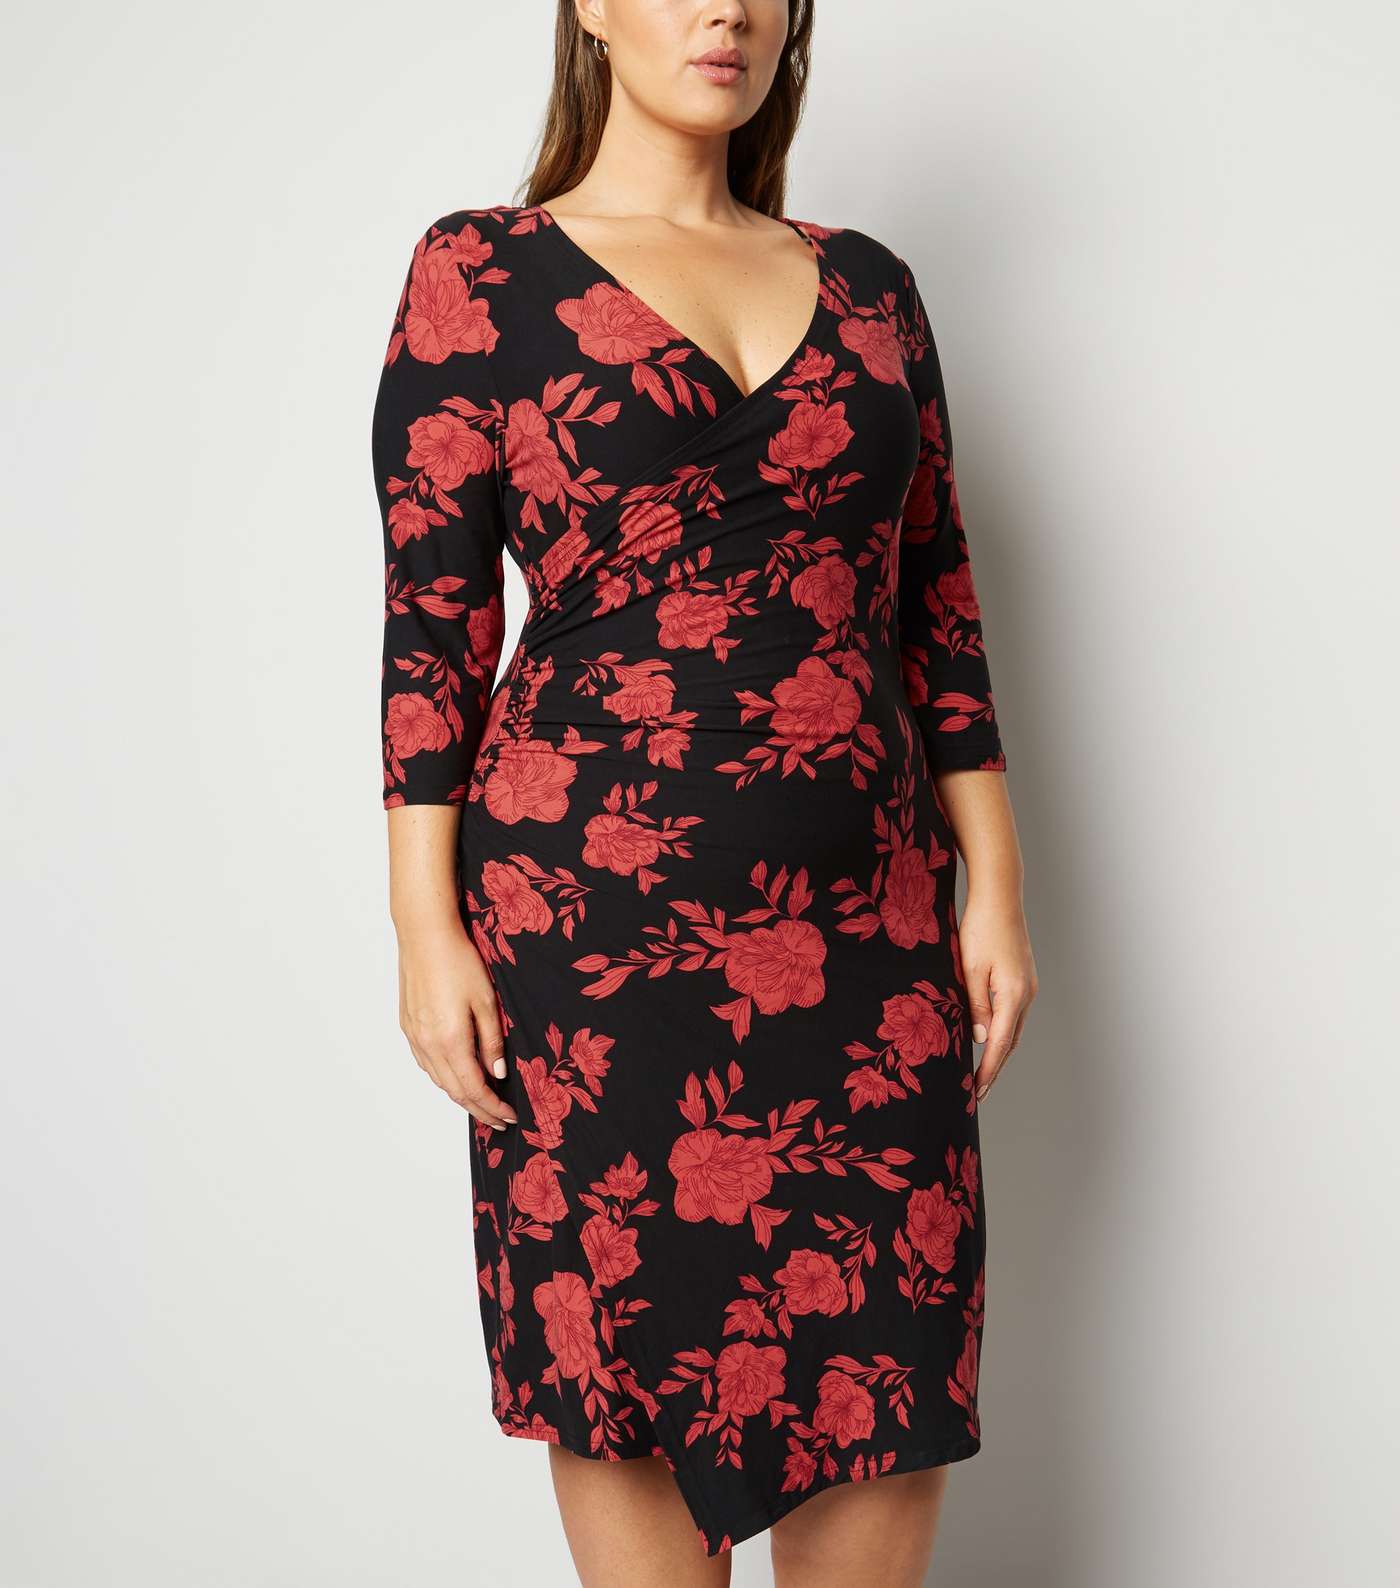 Blue Vanilla Curves Red Floral Ruched Wrap Dress